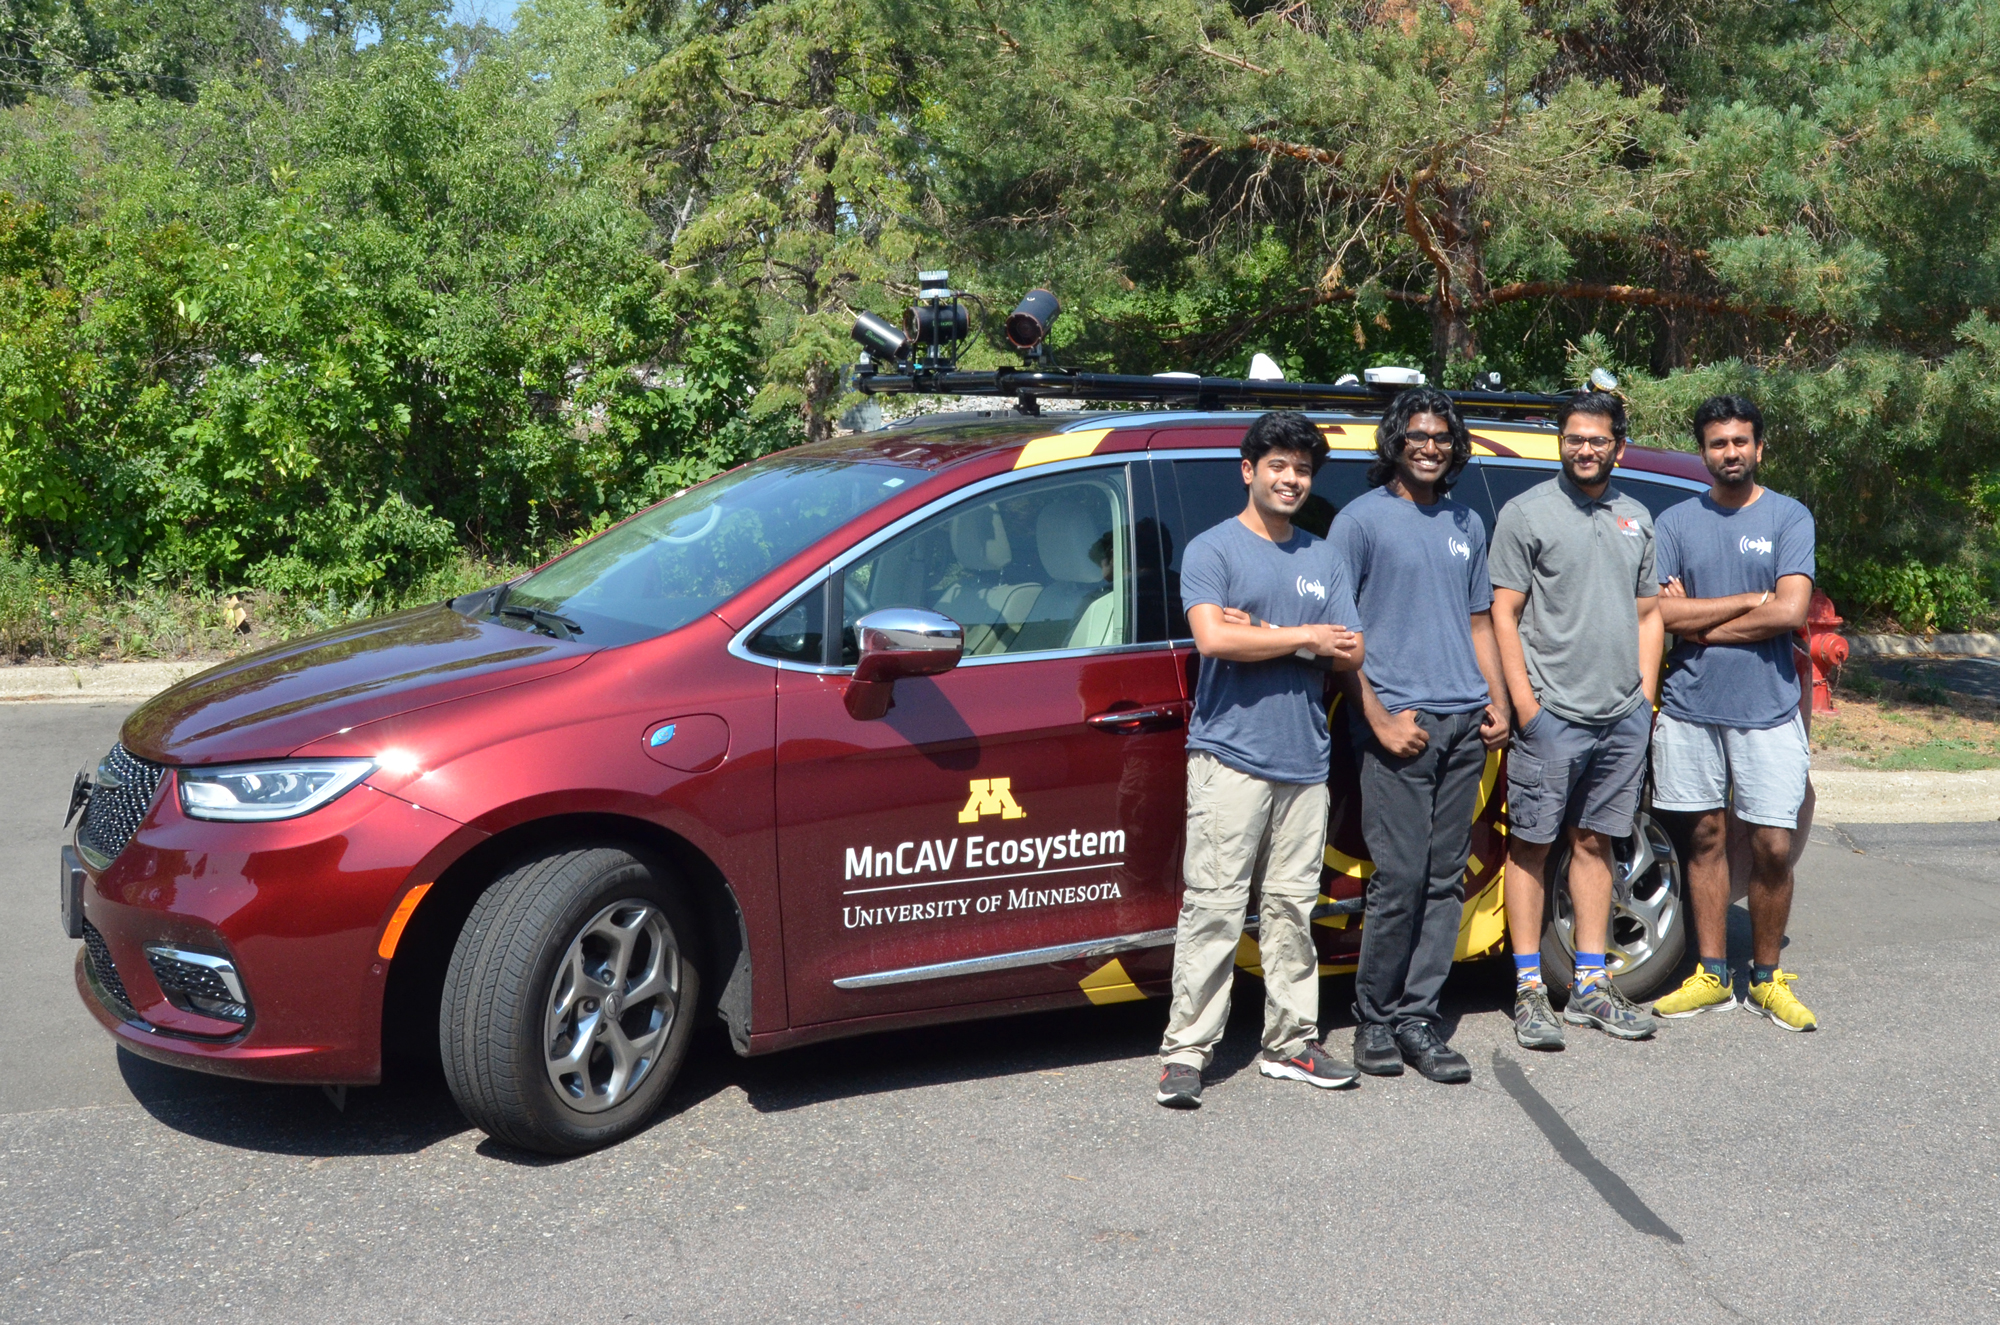 2023 VSI Labs interns standing with the MnCAV automated vehicle